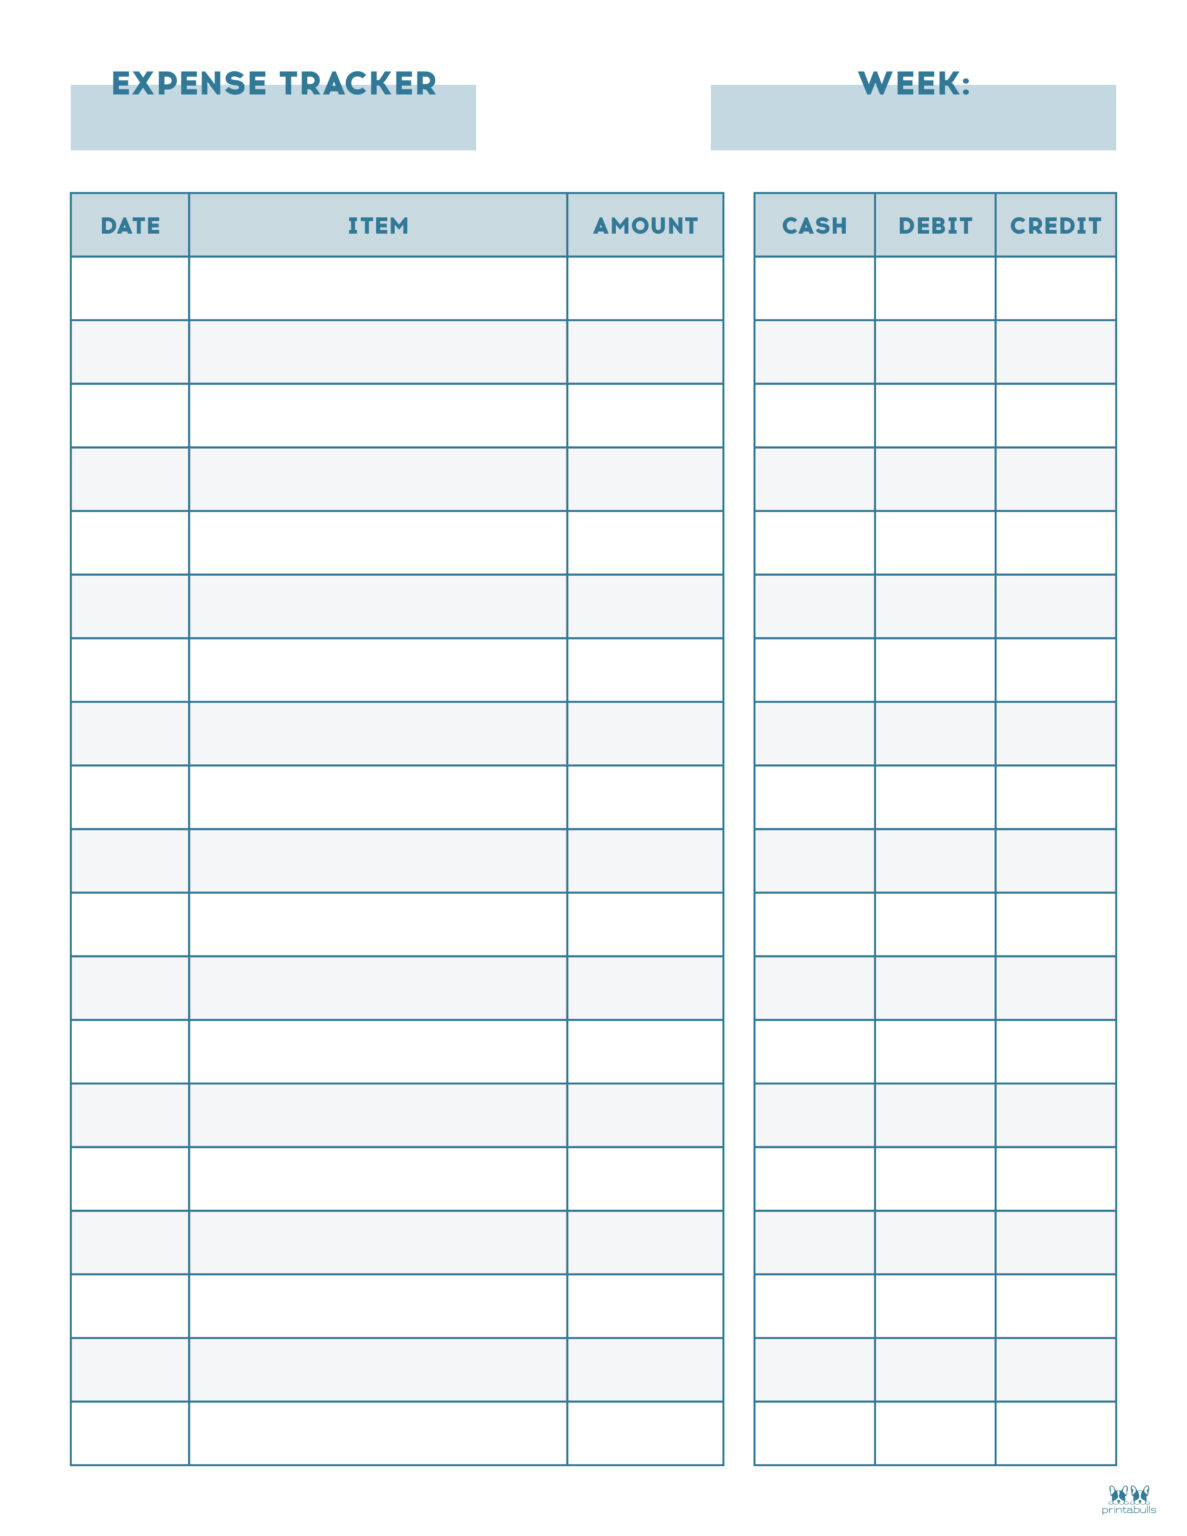 free kids expense tracker printable in color